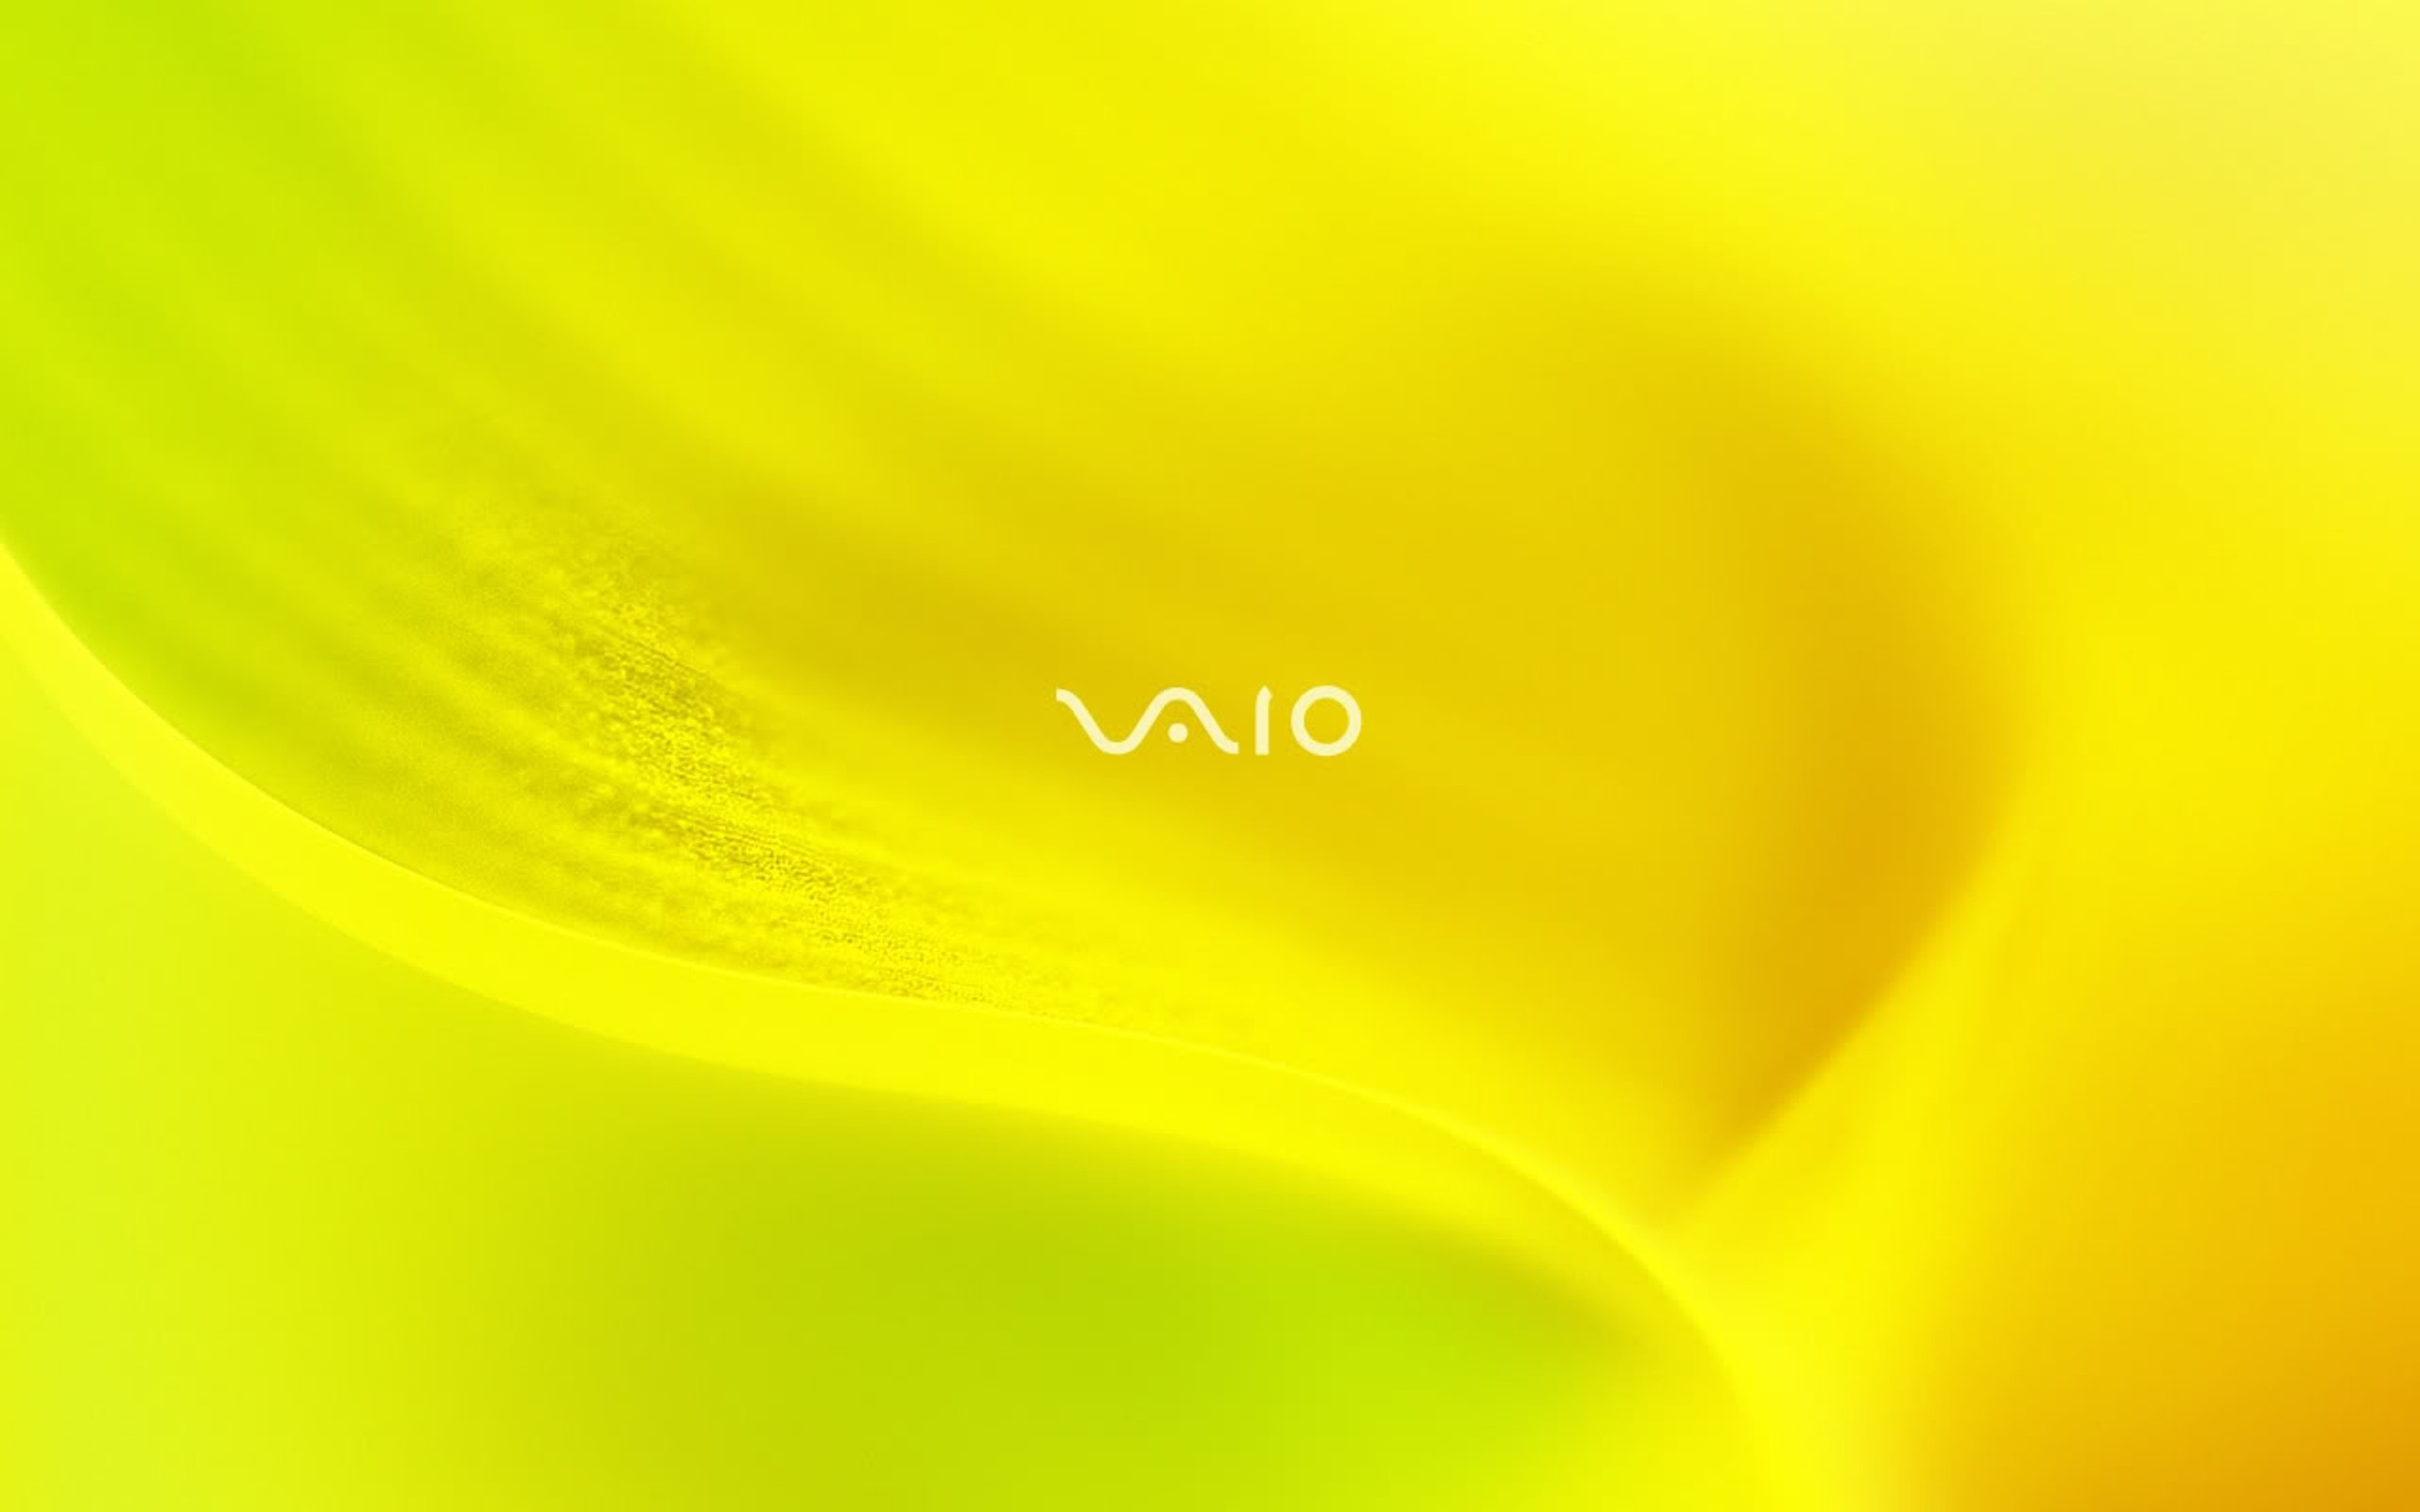 Vaio Tender Yellow Wallpapers And Stock Photos 
 Data - Vaio Wallpaper Yellow - HD Wallpaper 